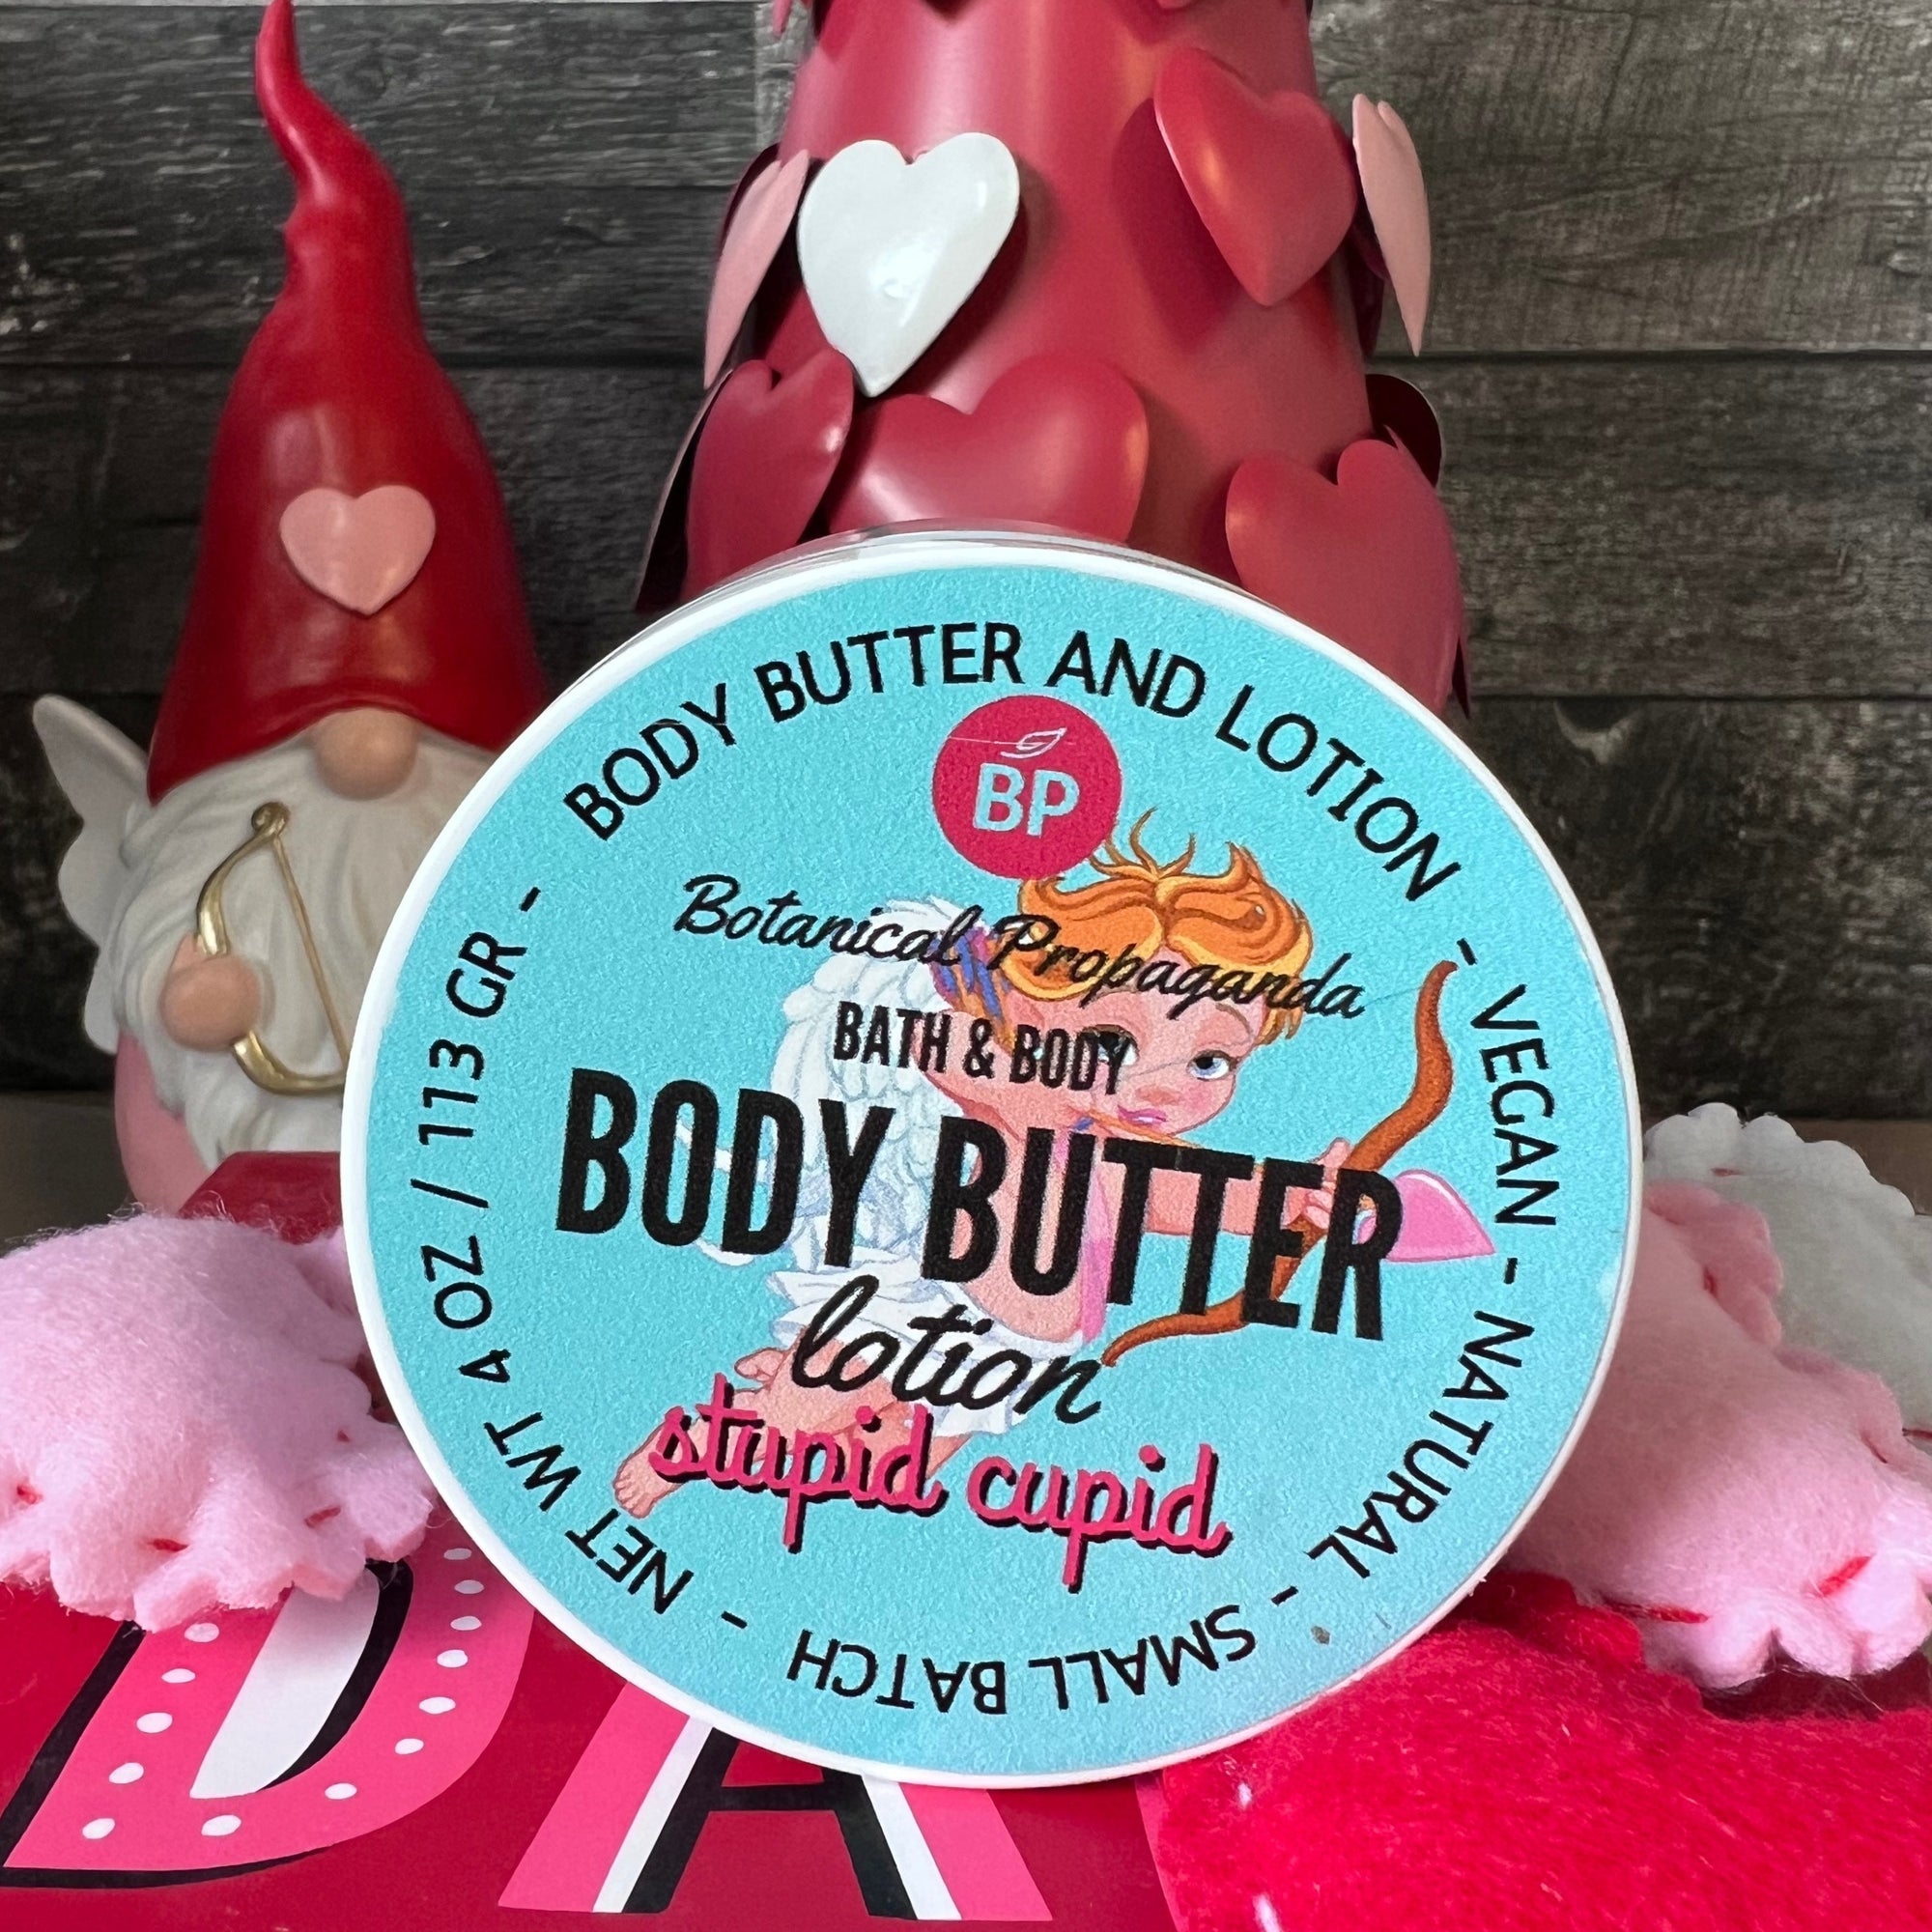 Stupid Cupid Body Butter / Lotion